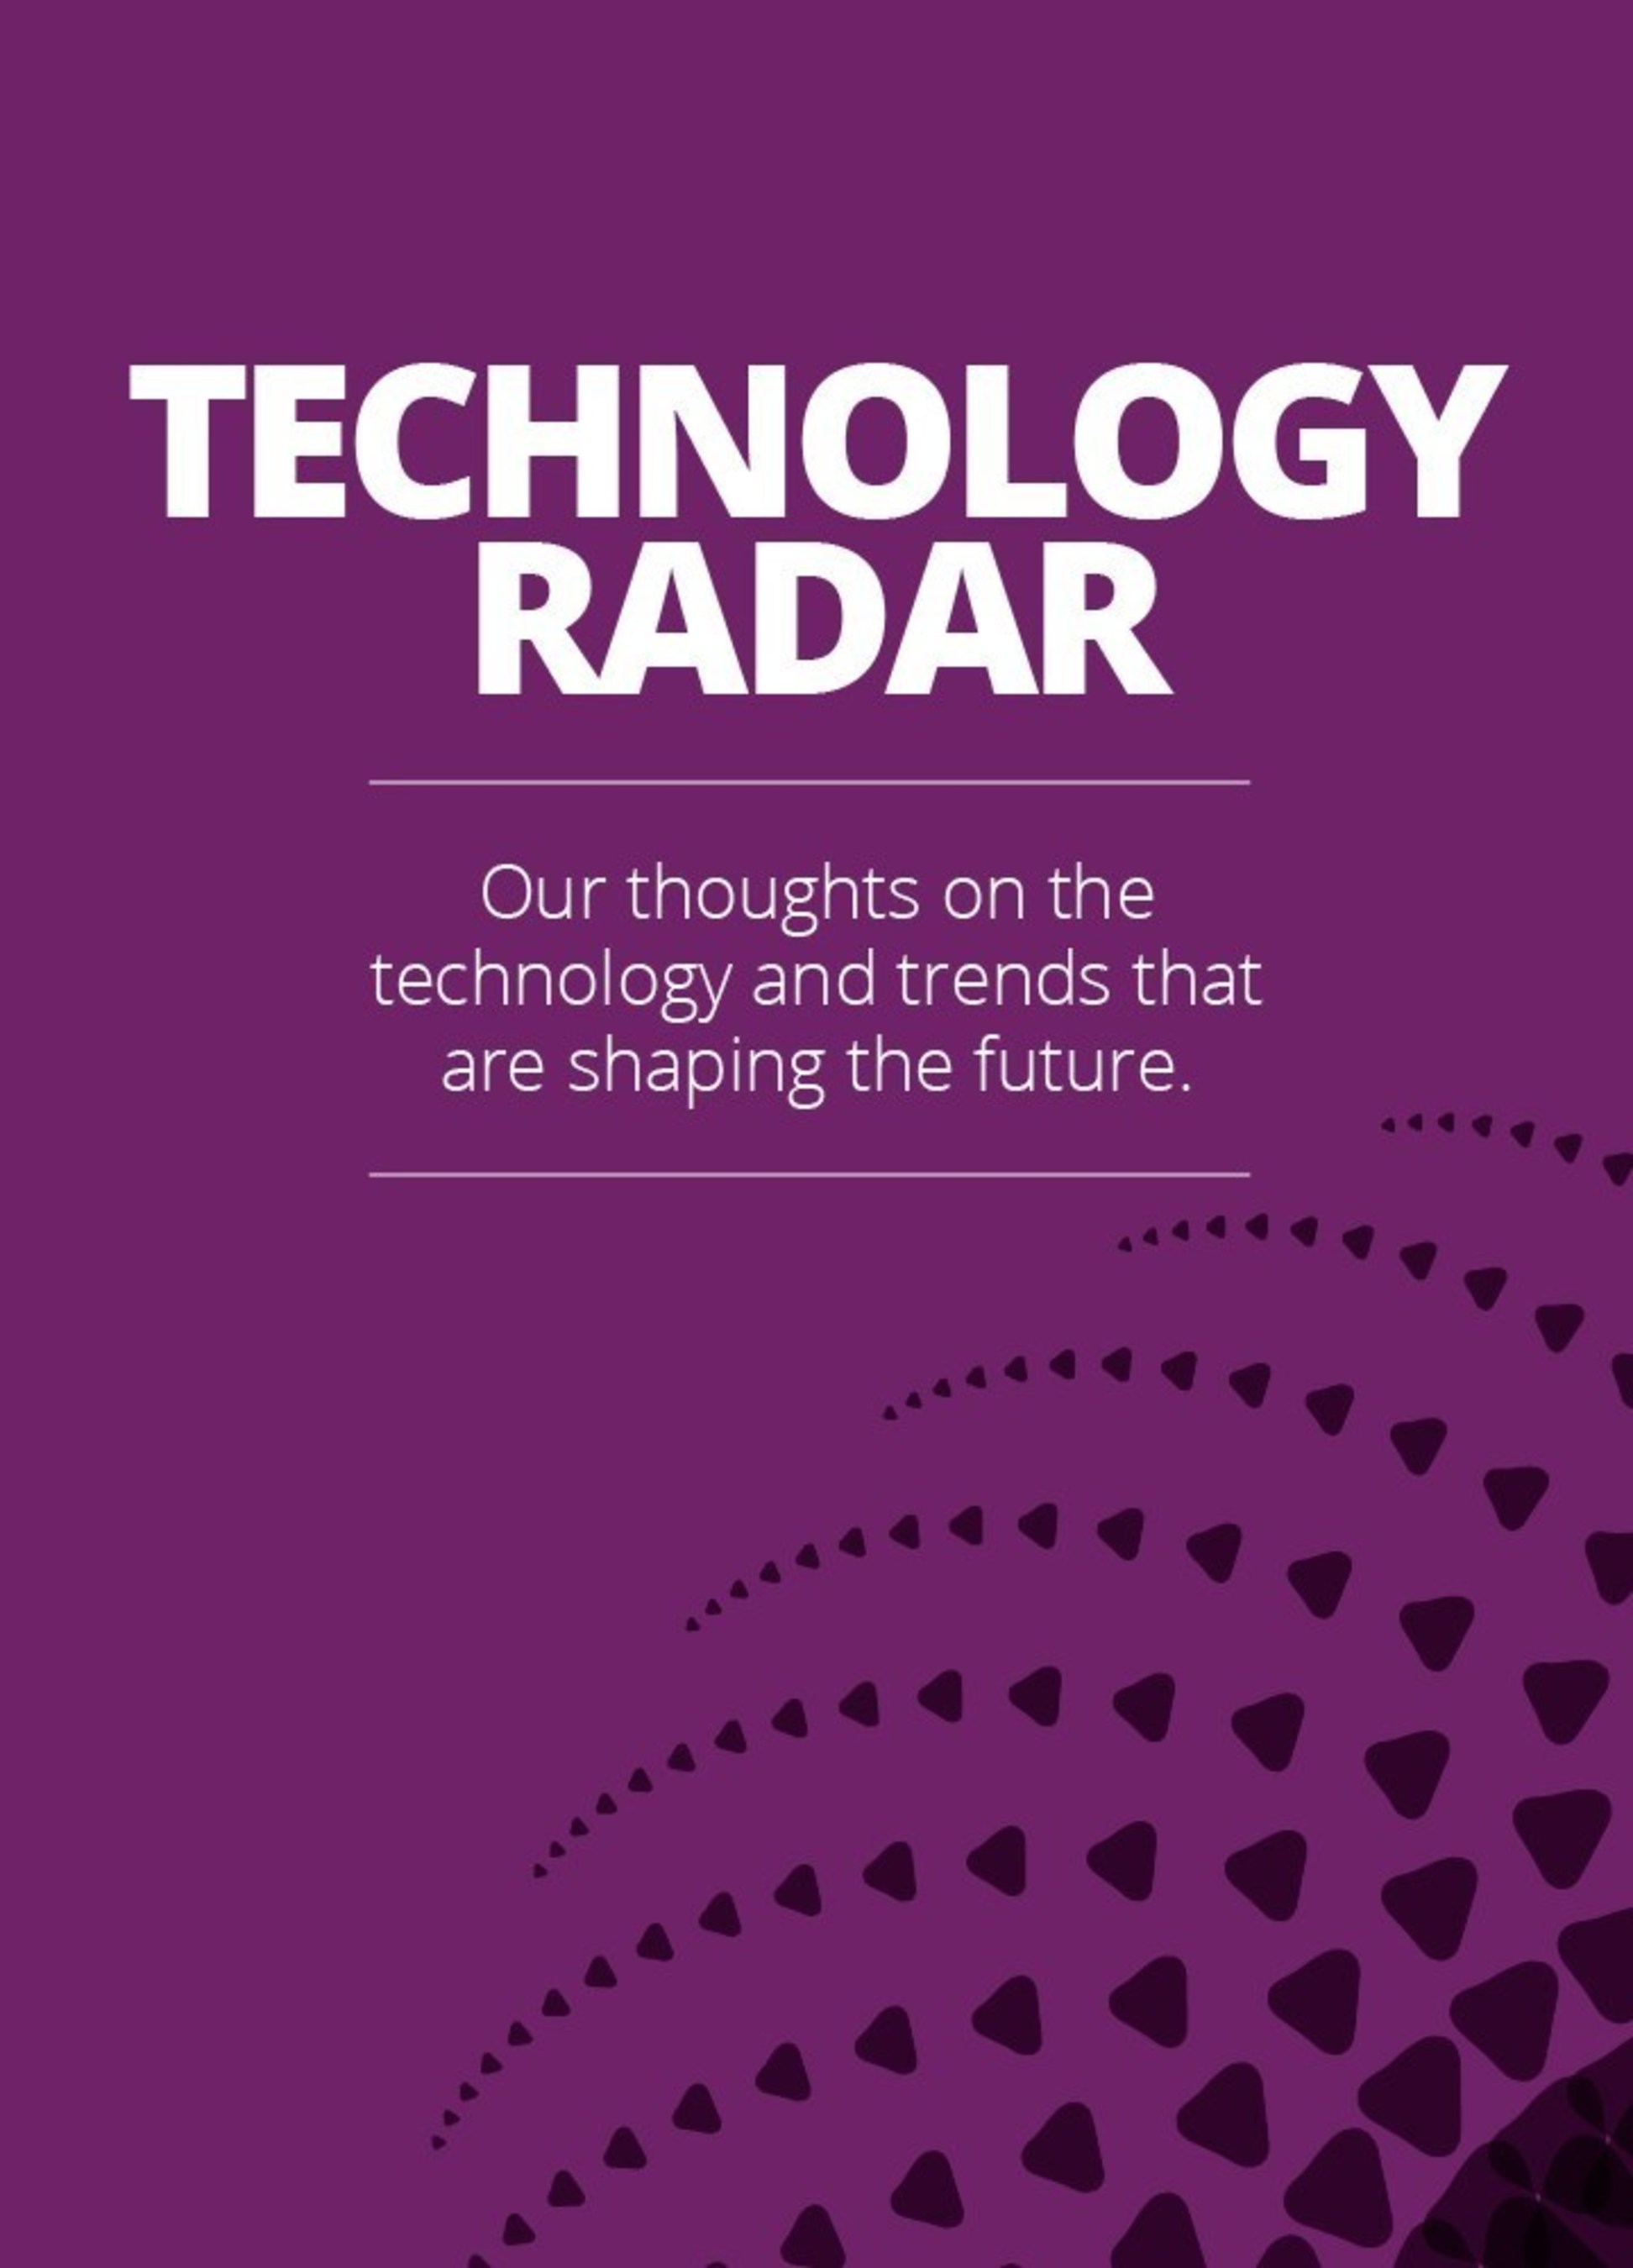 ThoughtWorks Technology Radar - Visit www.thoughtworks.com/radar to explore the interactive version or download a copy in PDF format.